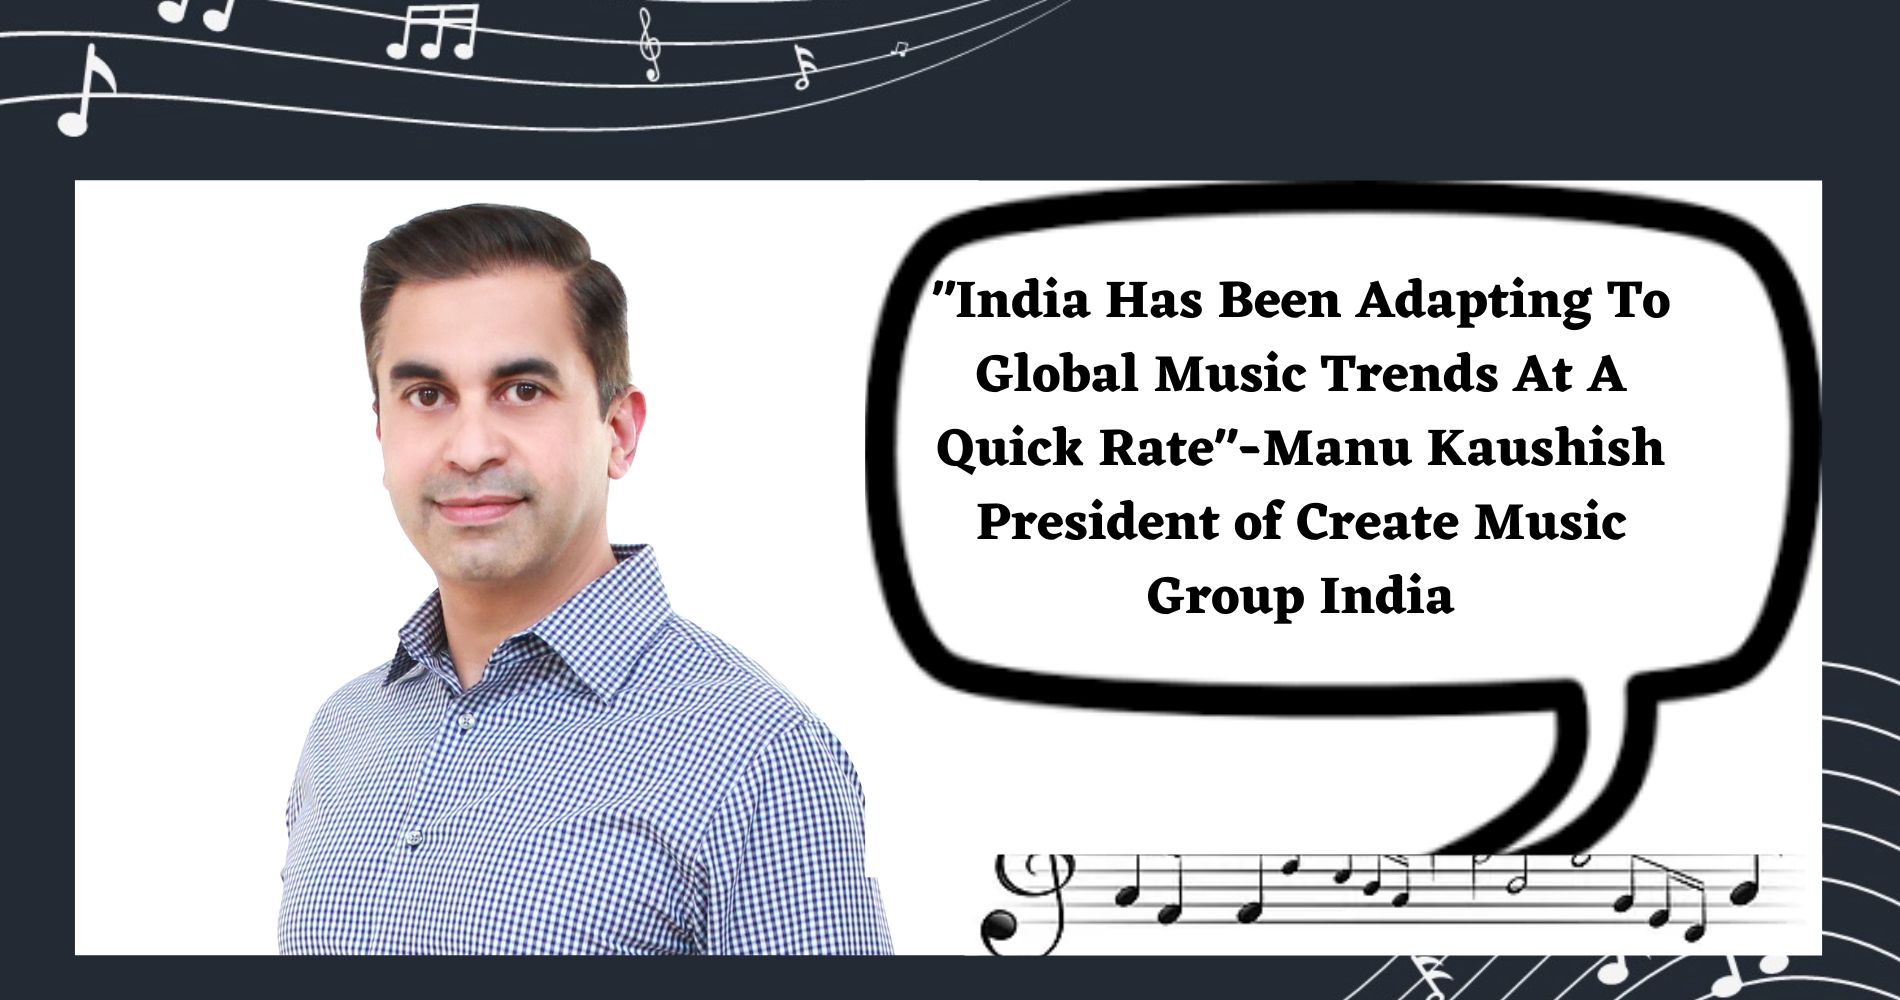 "India Has Been Adapting To Global Music Trends At A Quick Rate"-Manu Kaushish President of Create Music Group India